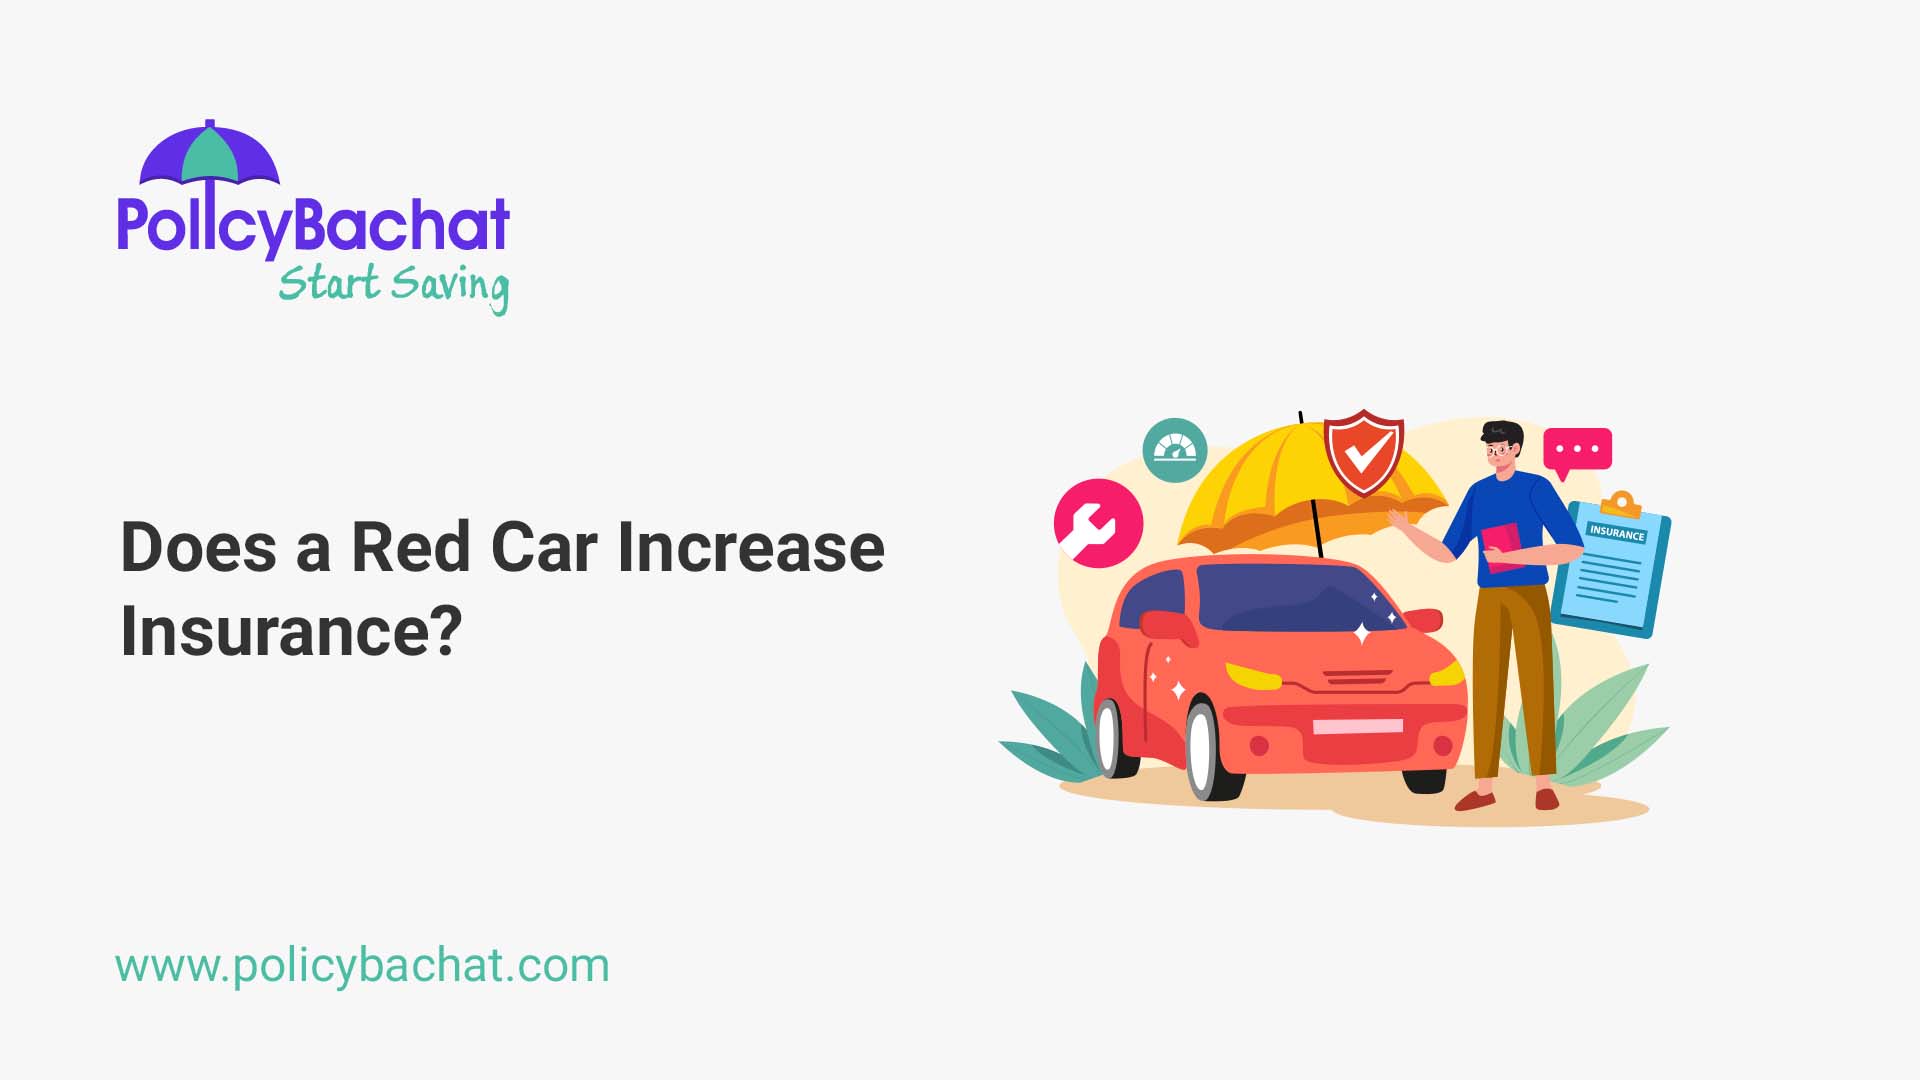 Does a Red Car Increase Insurance? - PolicyBachat